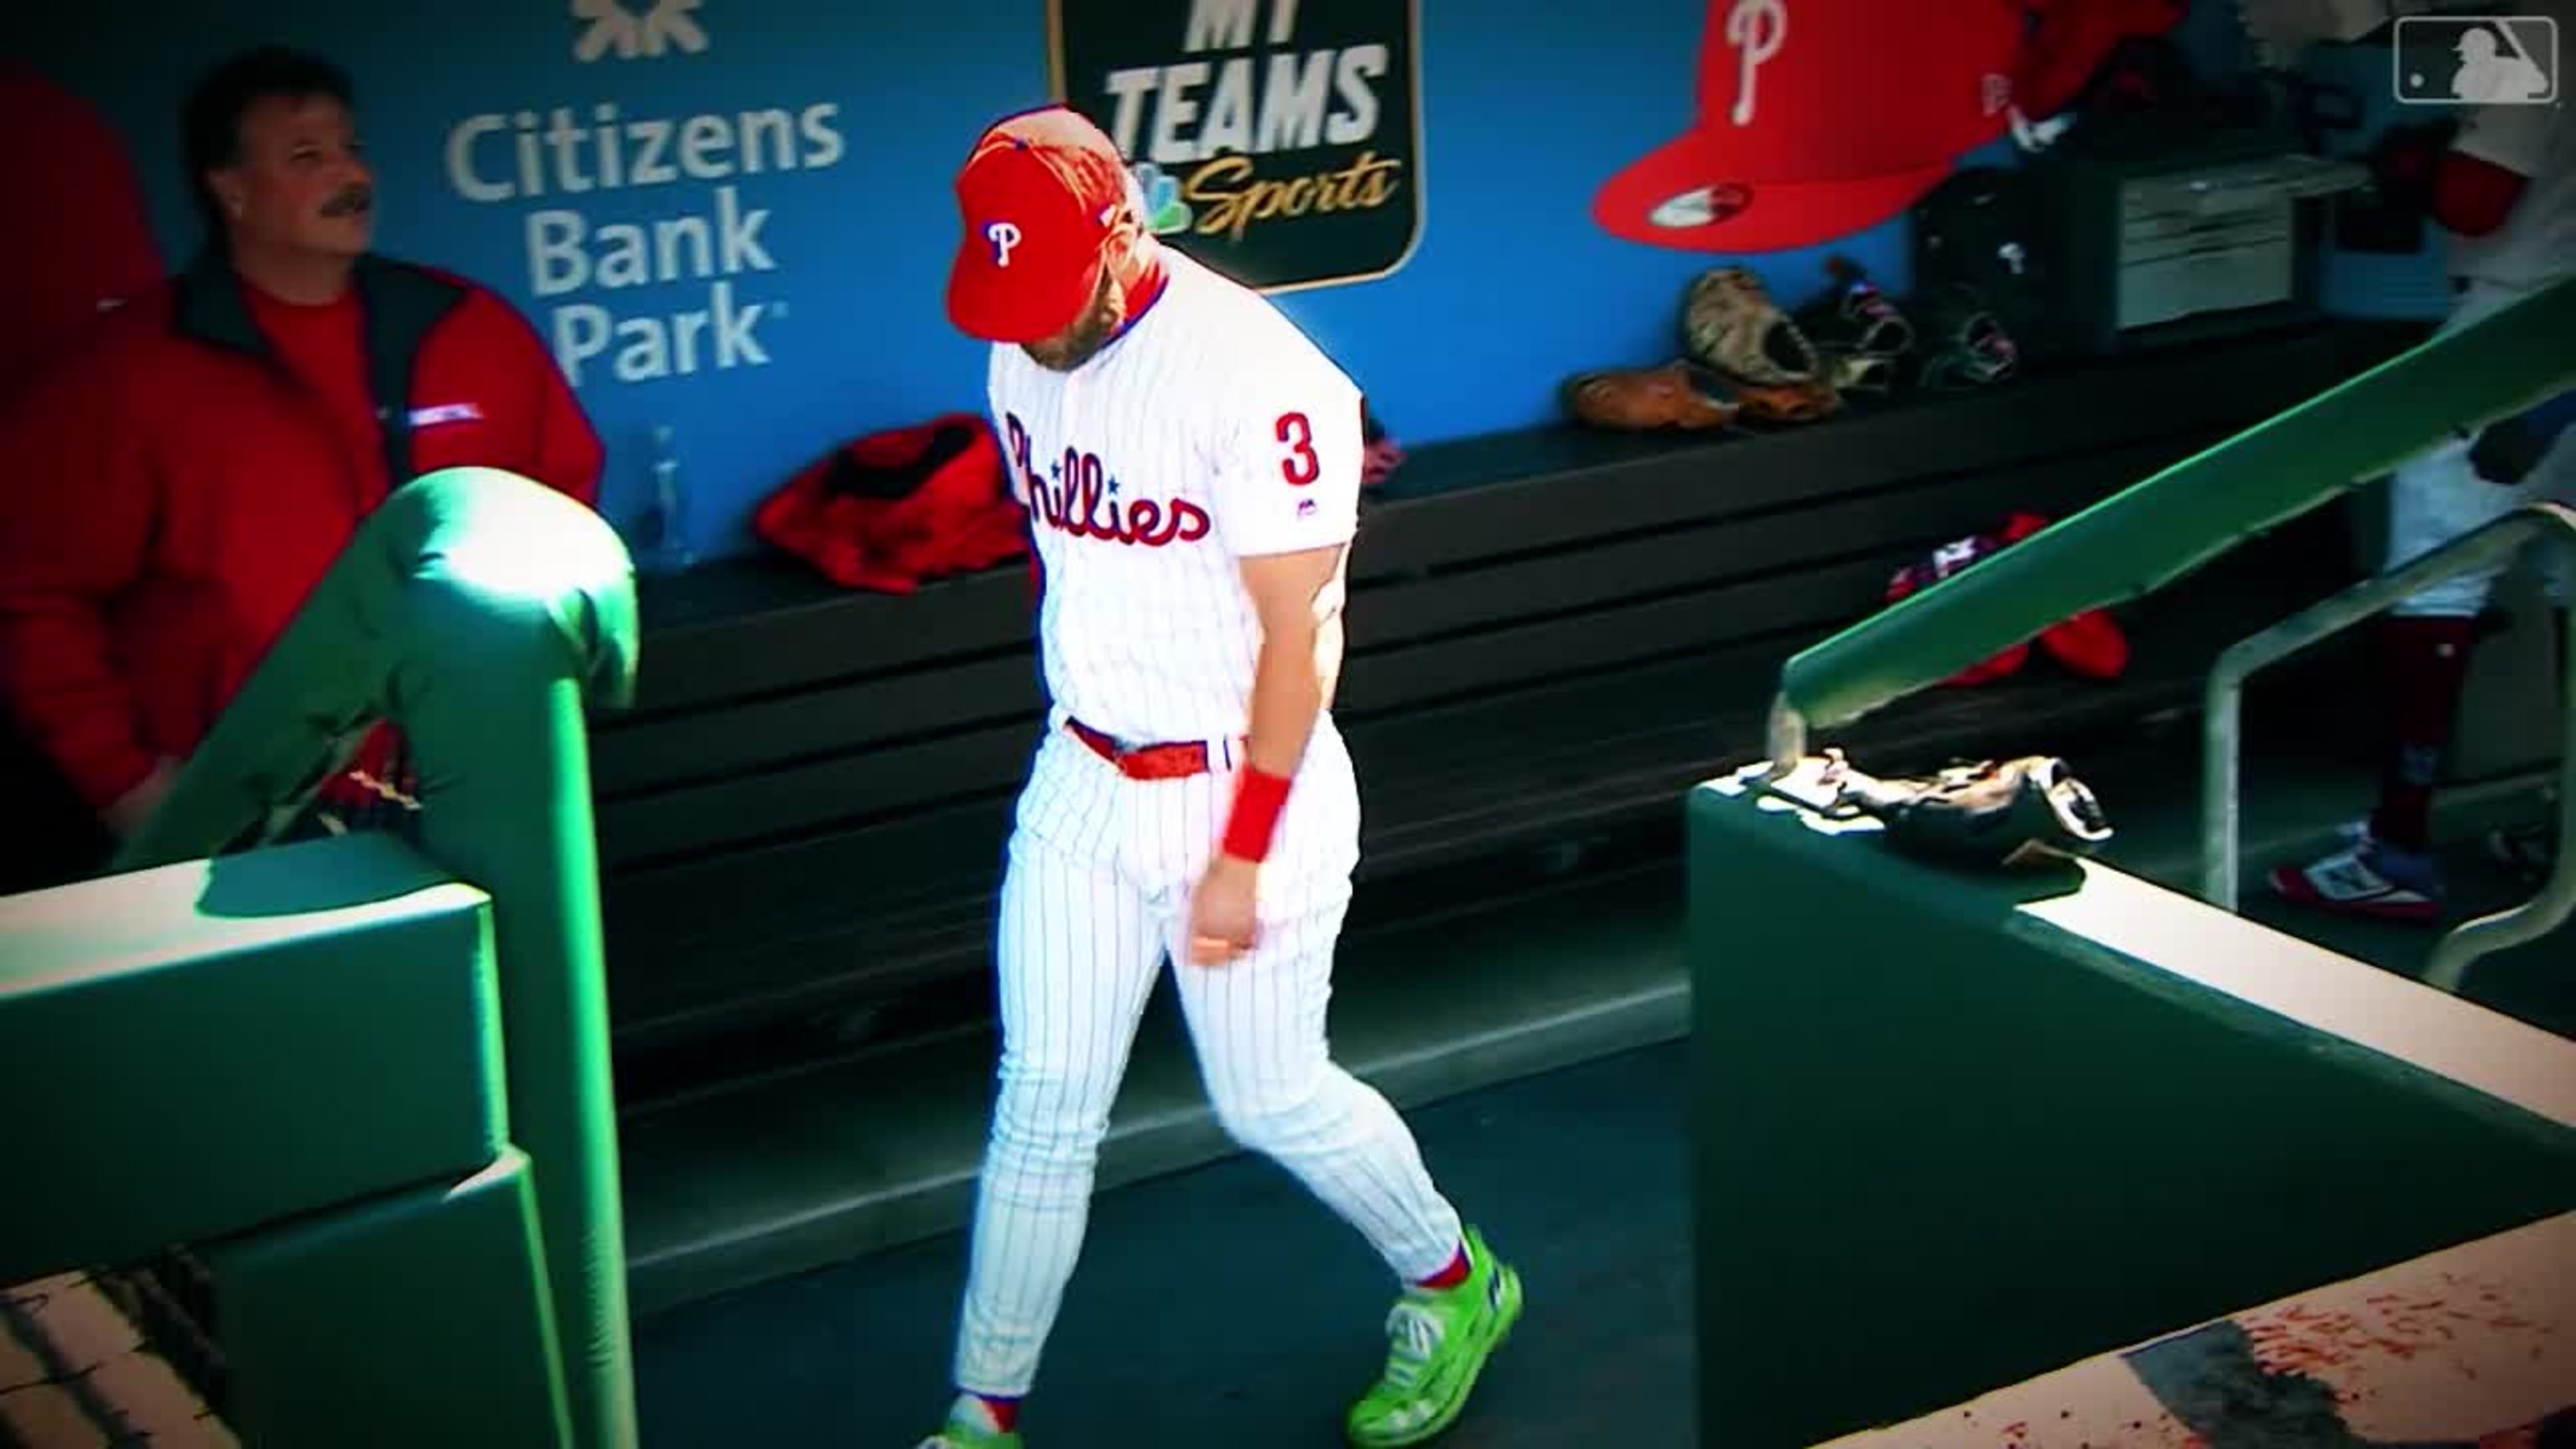 Harper's career with the Phillies